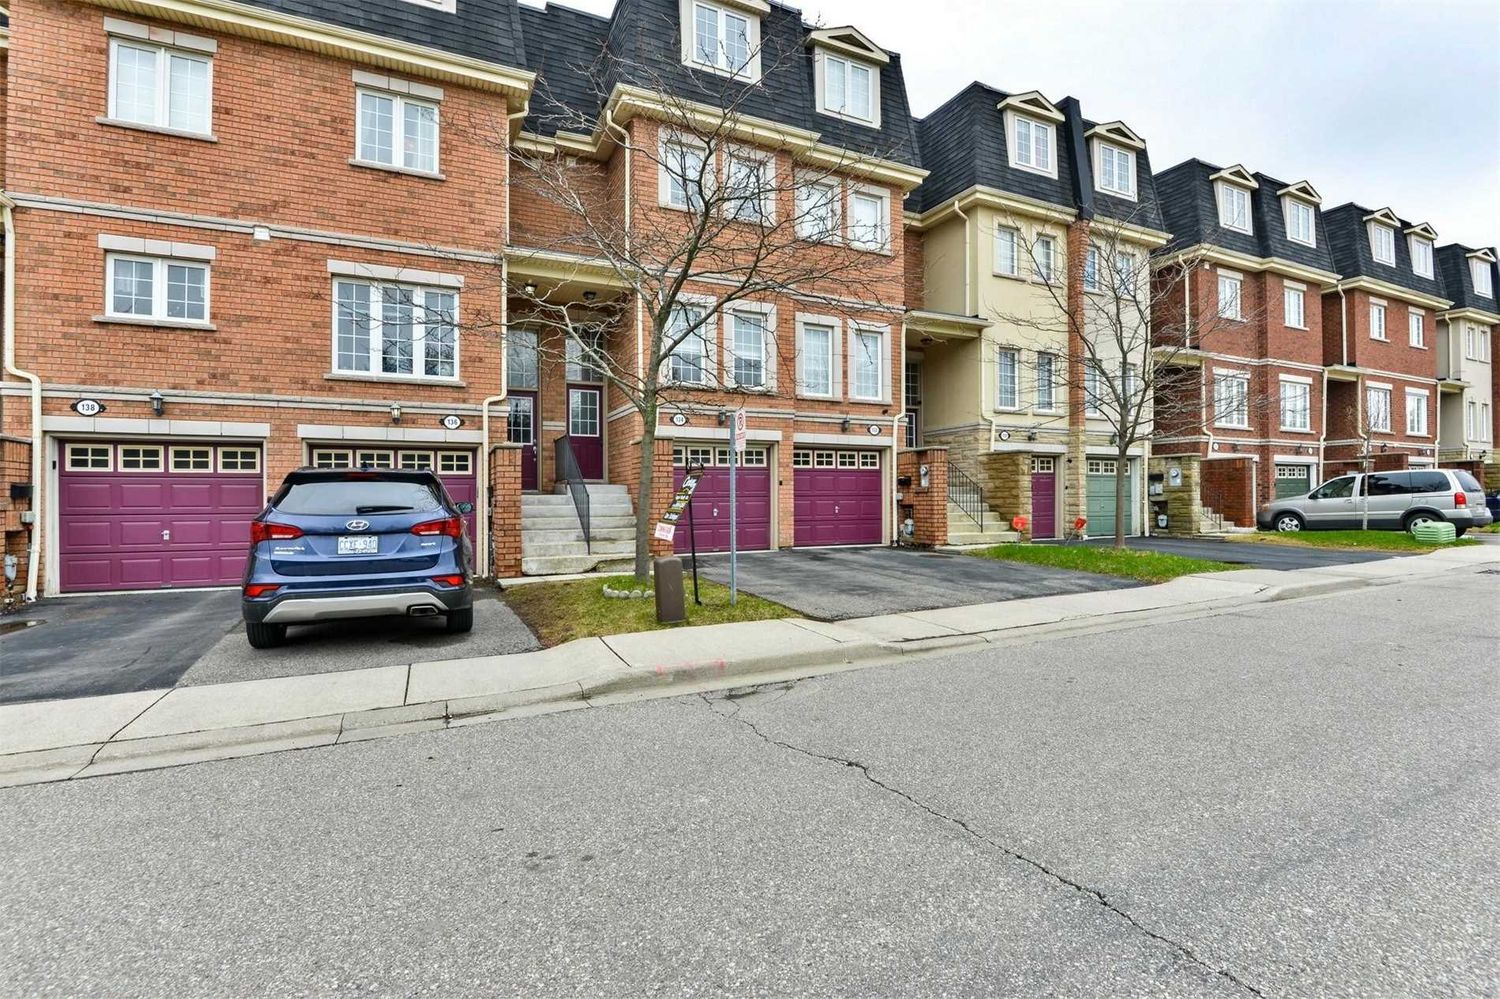 435 Hensall Cir. 435 Hensall Circ Townhomes is located in  Mississauga, Toronto - image #1 of 2